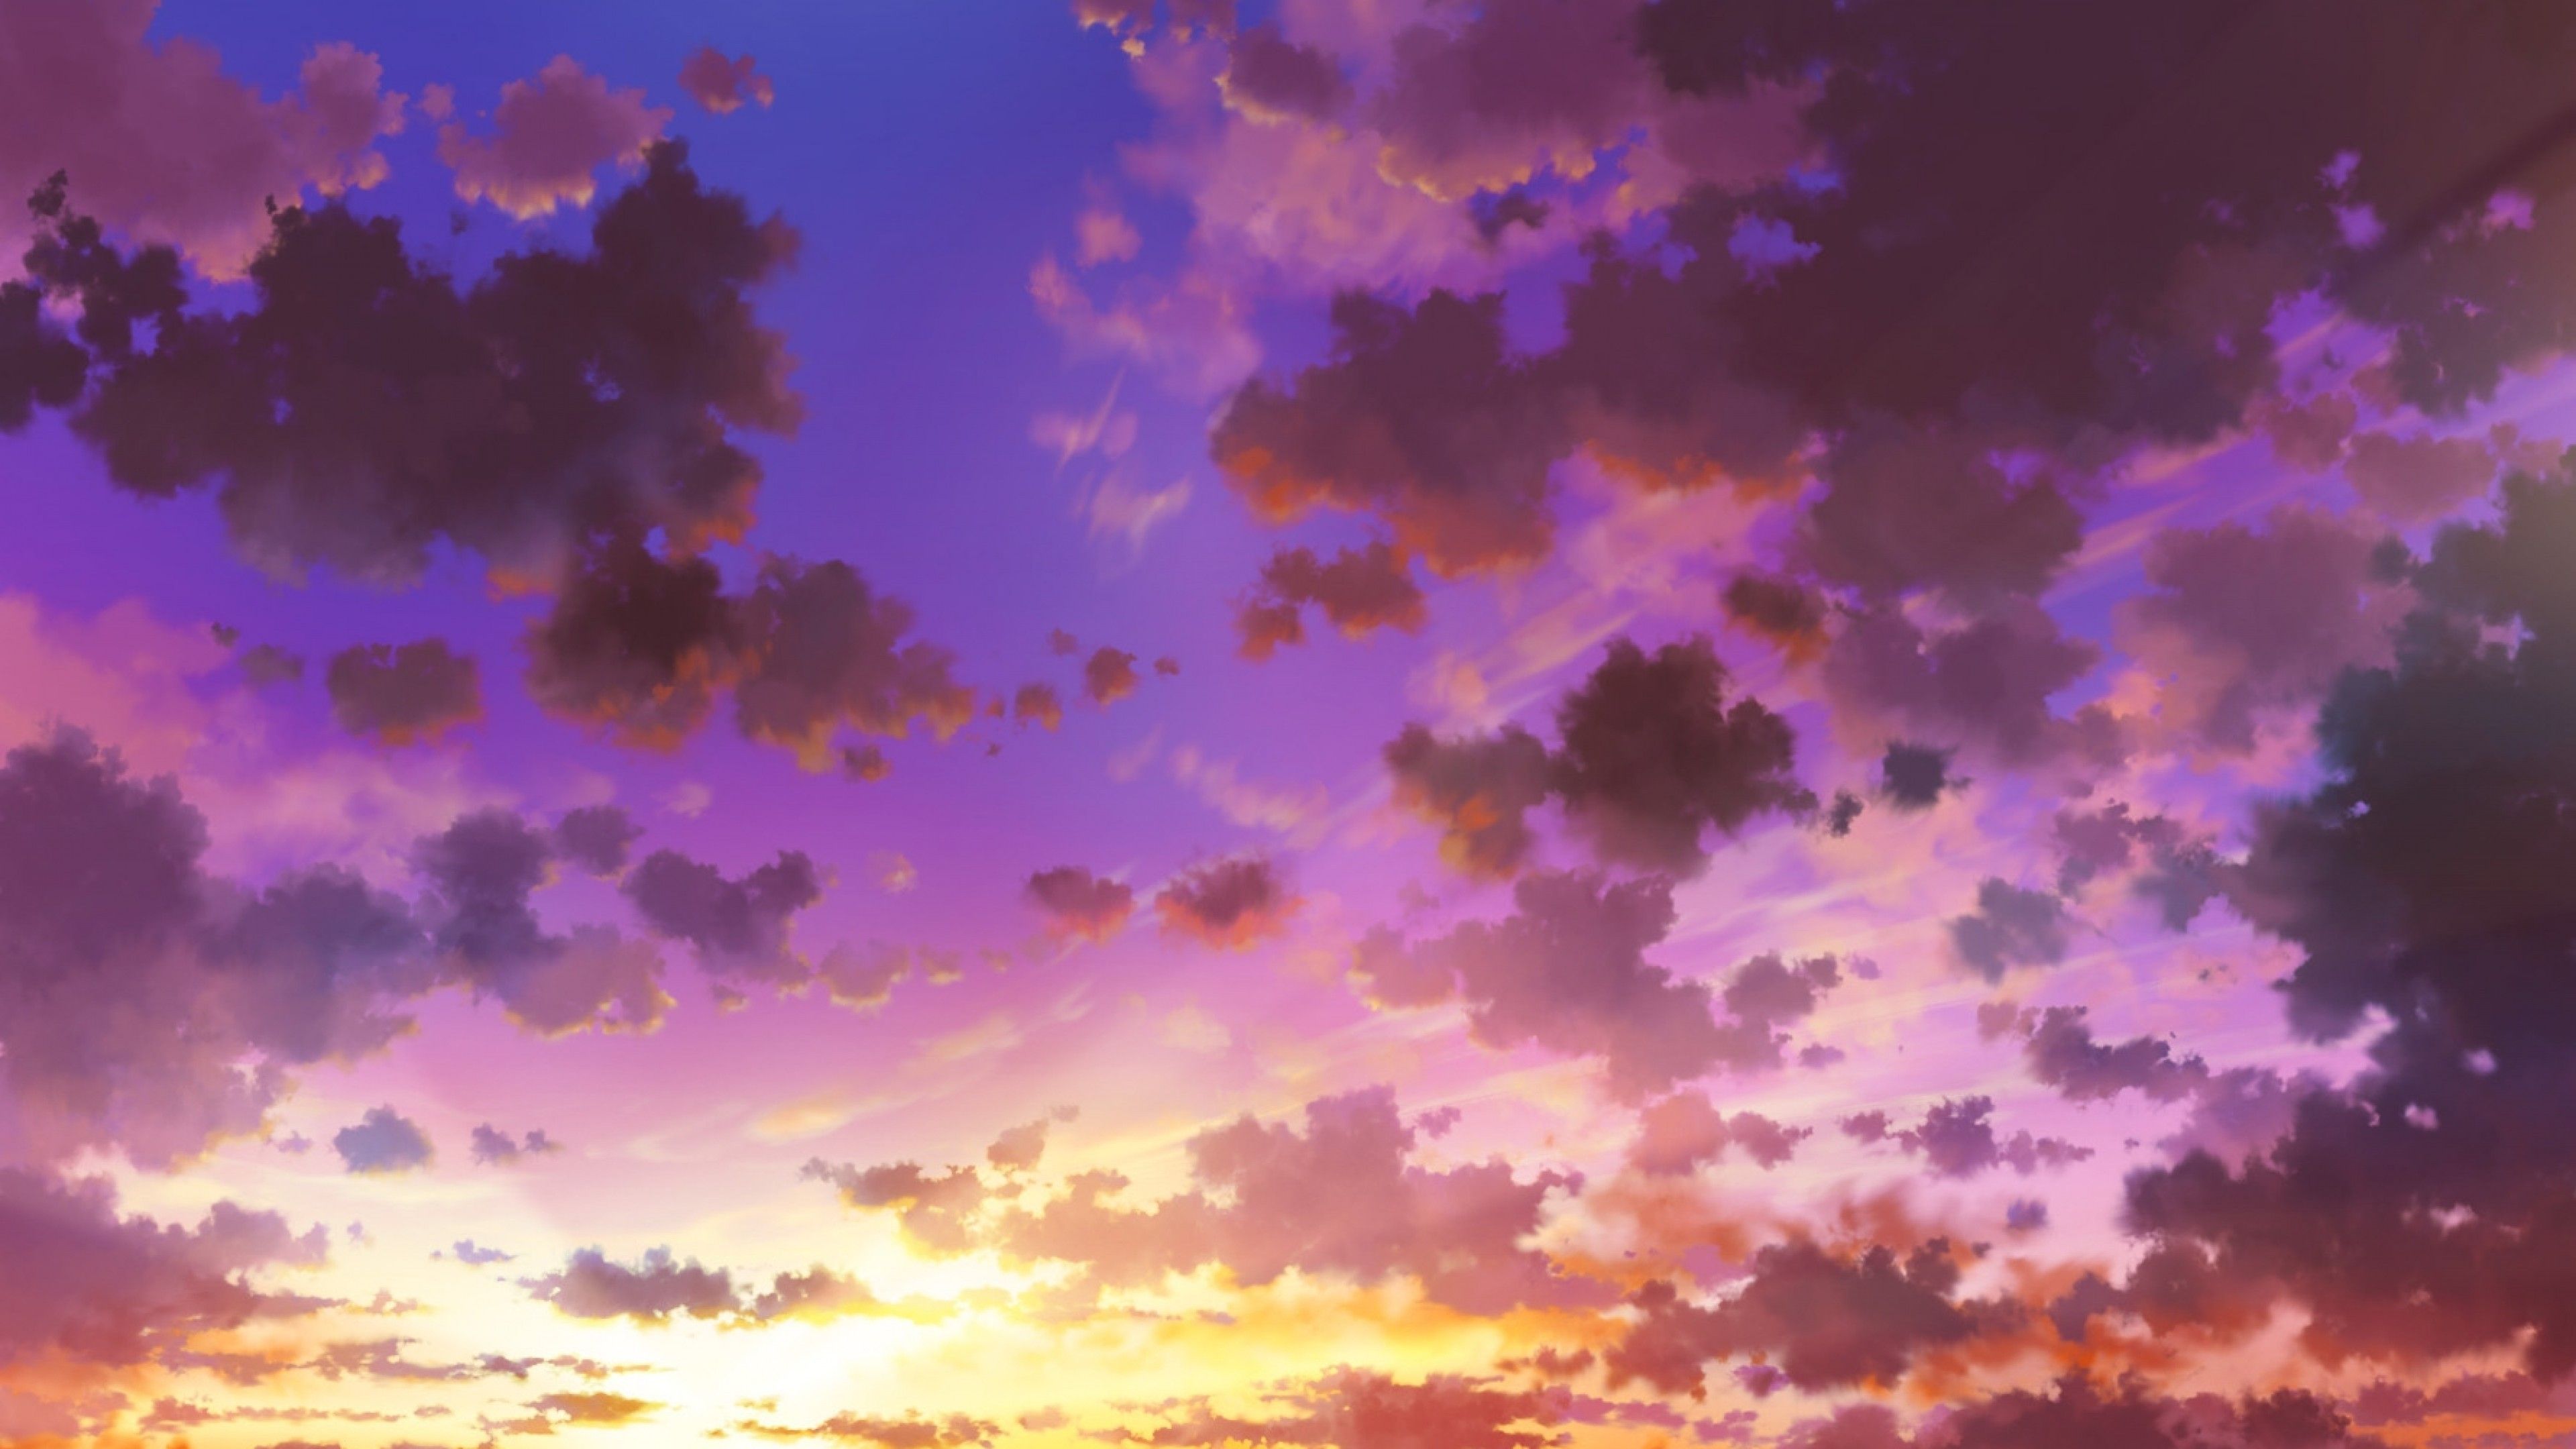 Download 3840x2160 Anime Sky, Sunset, Clouds Wallpapers for UHD TV